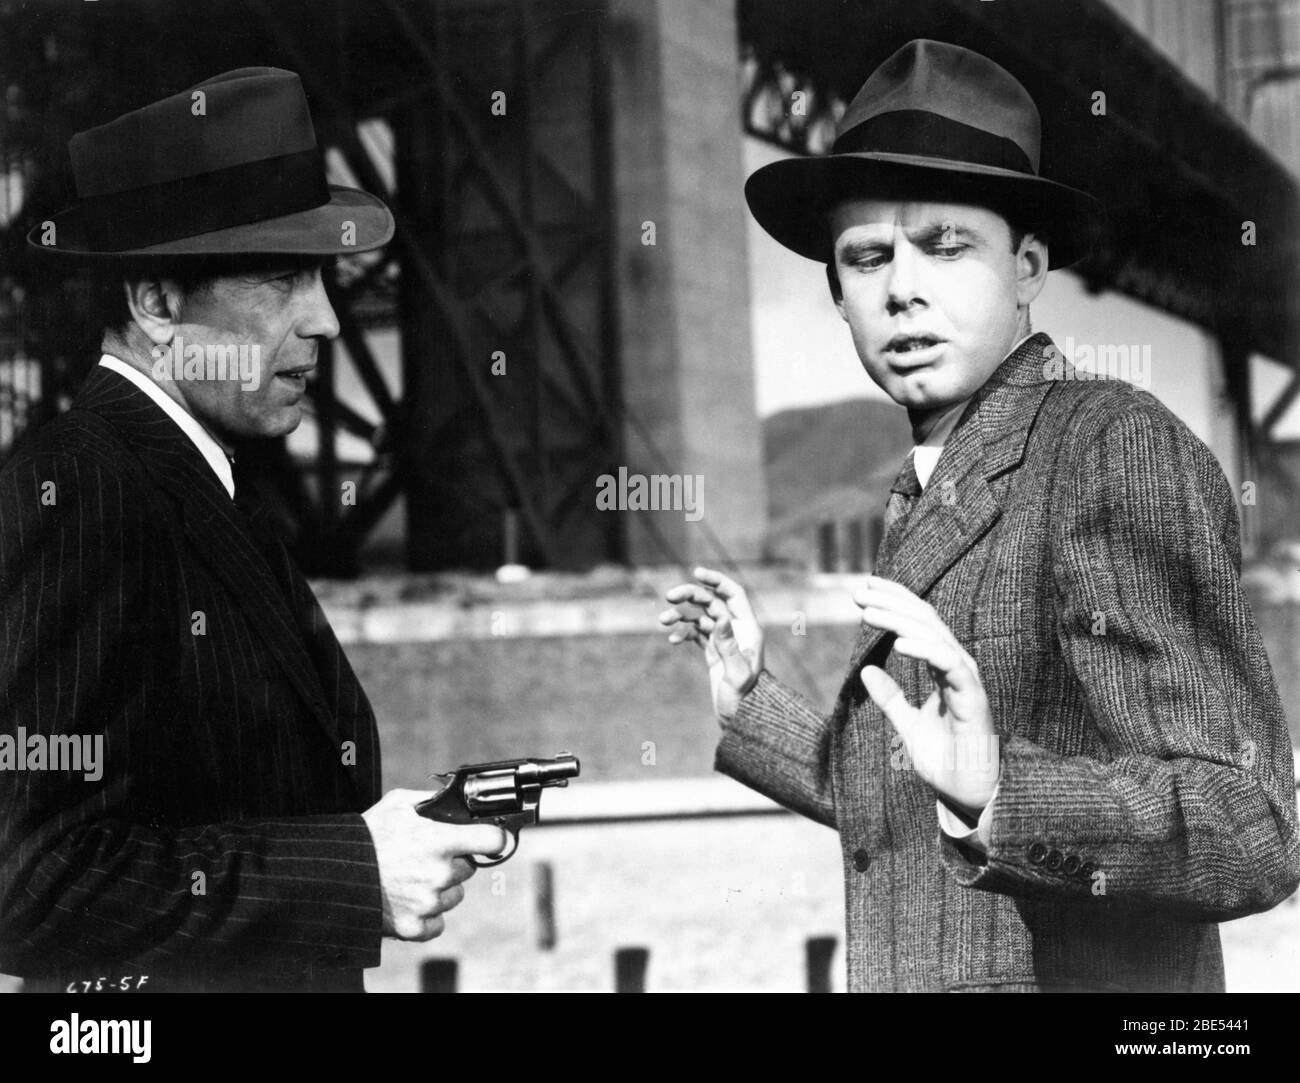 HUMPHREY BOGART and CLIFTON YOUNG in DARK PASSAGE 1947 director / screenplay DELMER DAVES Warner Bros. Stock Photo